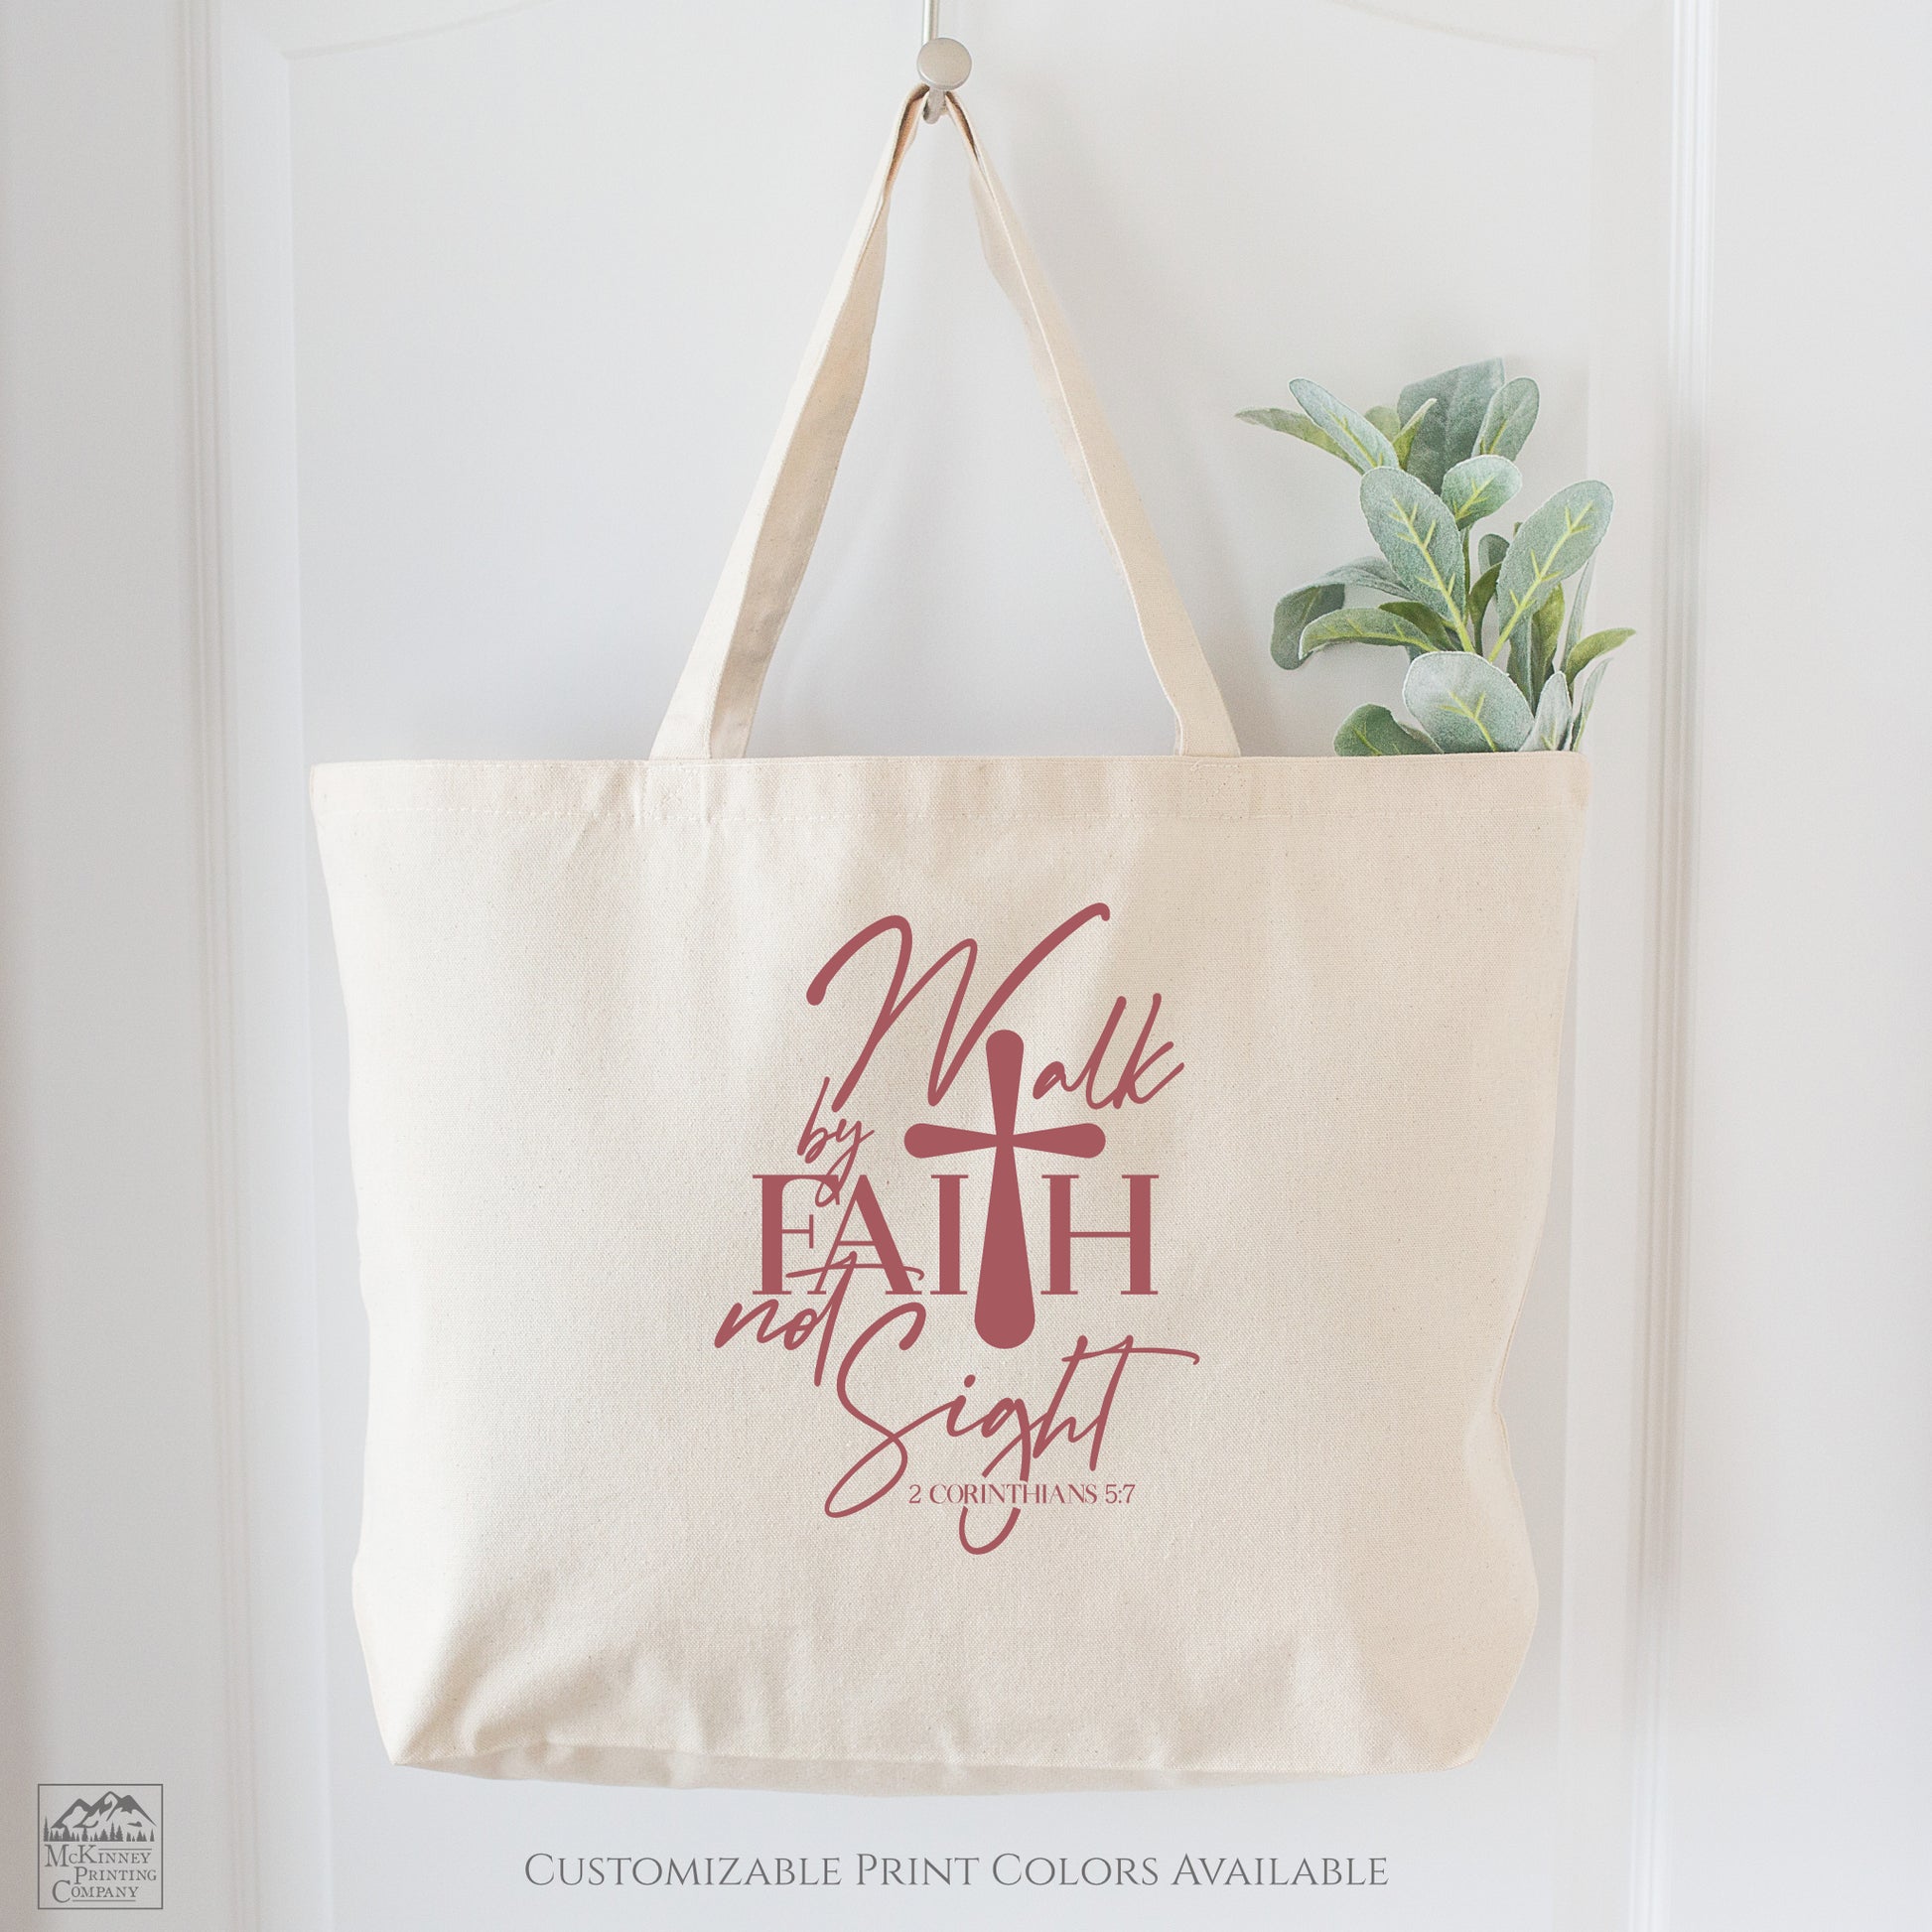 Walk by faith, not by sight - 2 Corinthians 5 7 - Christian Tote Bag, Fabric Shoulder Bag, Christian Gift